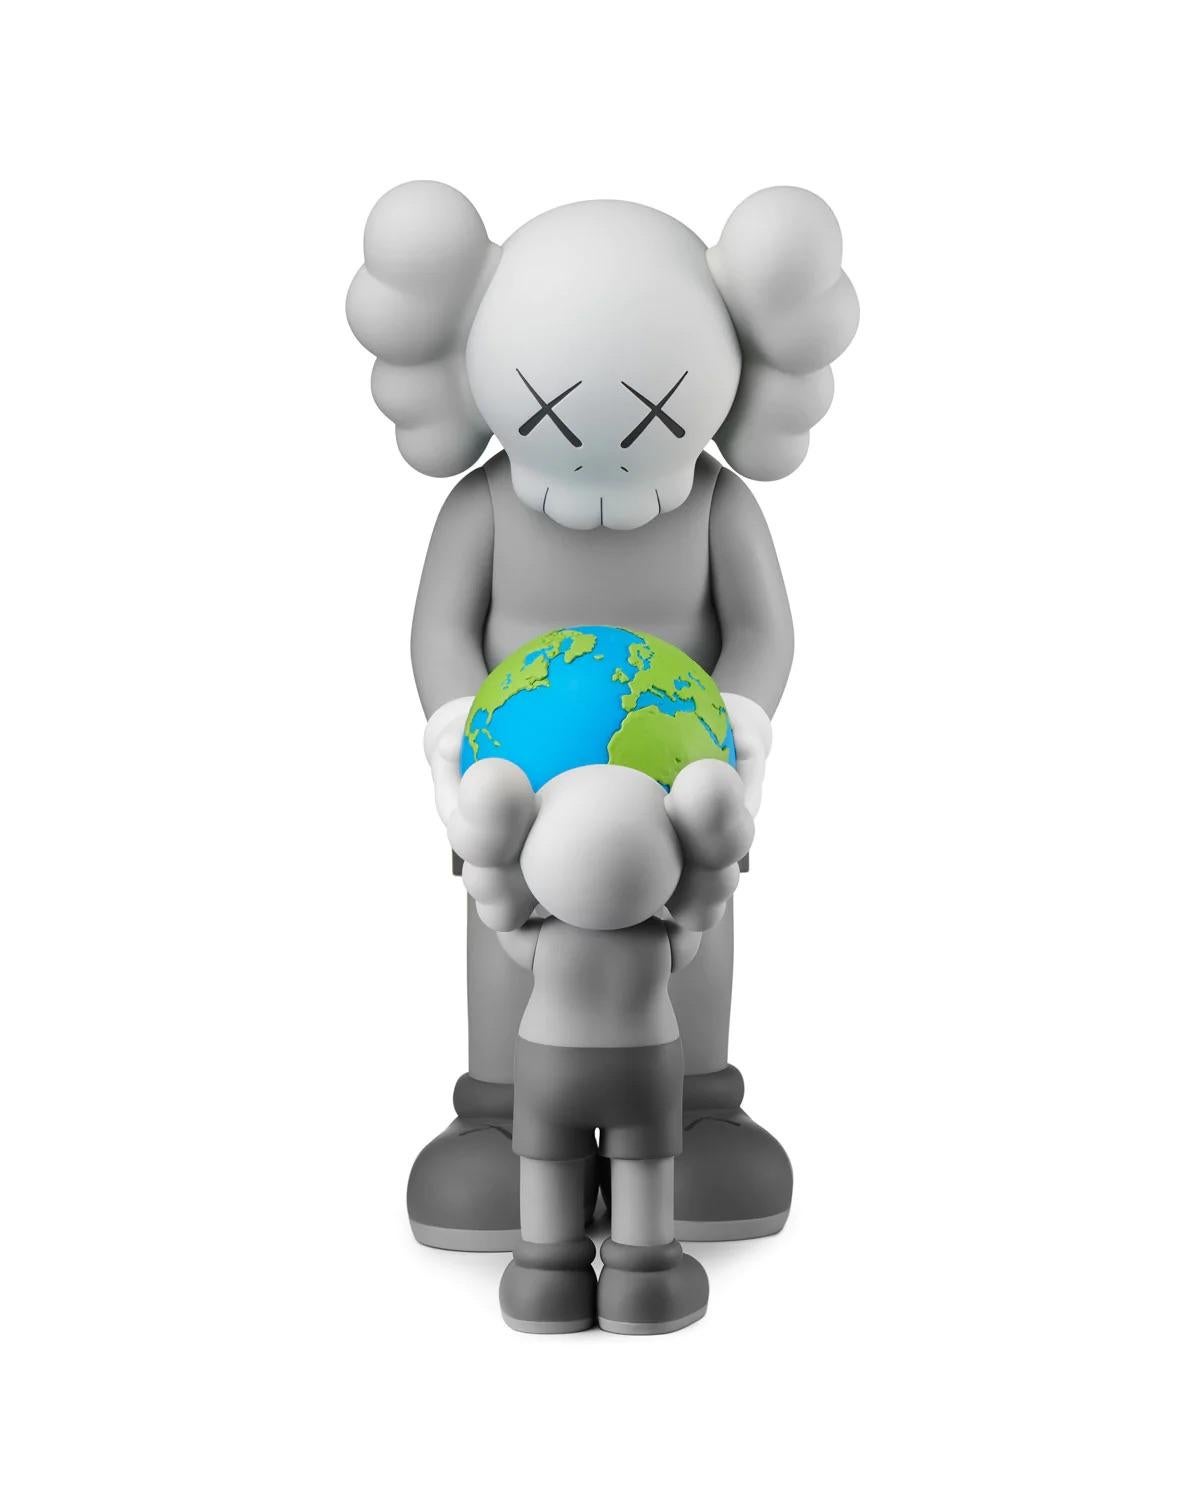 KAWS The Promise (set of 2 works):
A unique KAWS Companion set in the artist’s signature black & grey color ways. KAWS The Promise features a blue & green globe being affectionately shared between parent & child. These timeless, highly collectible